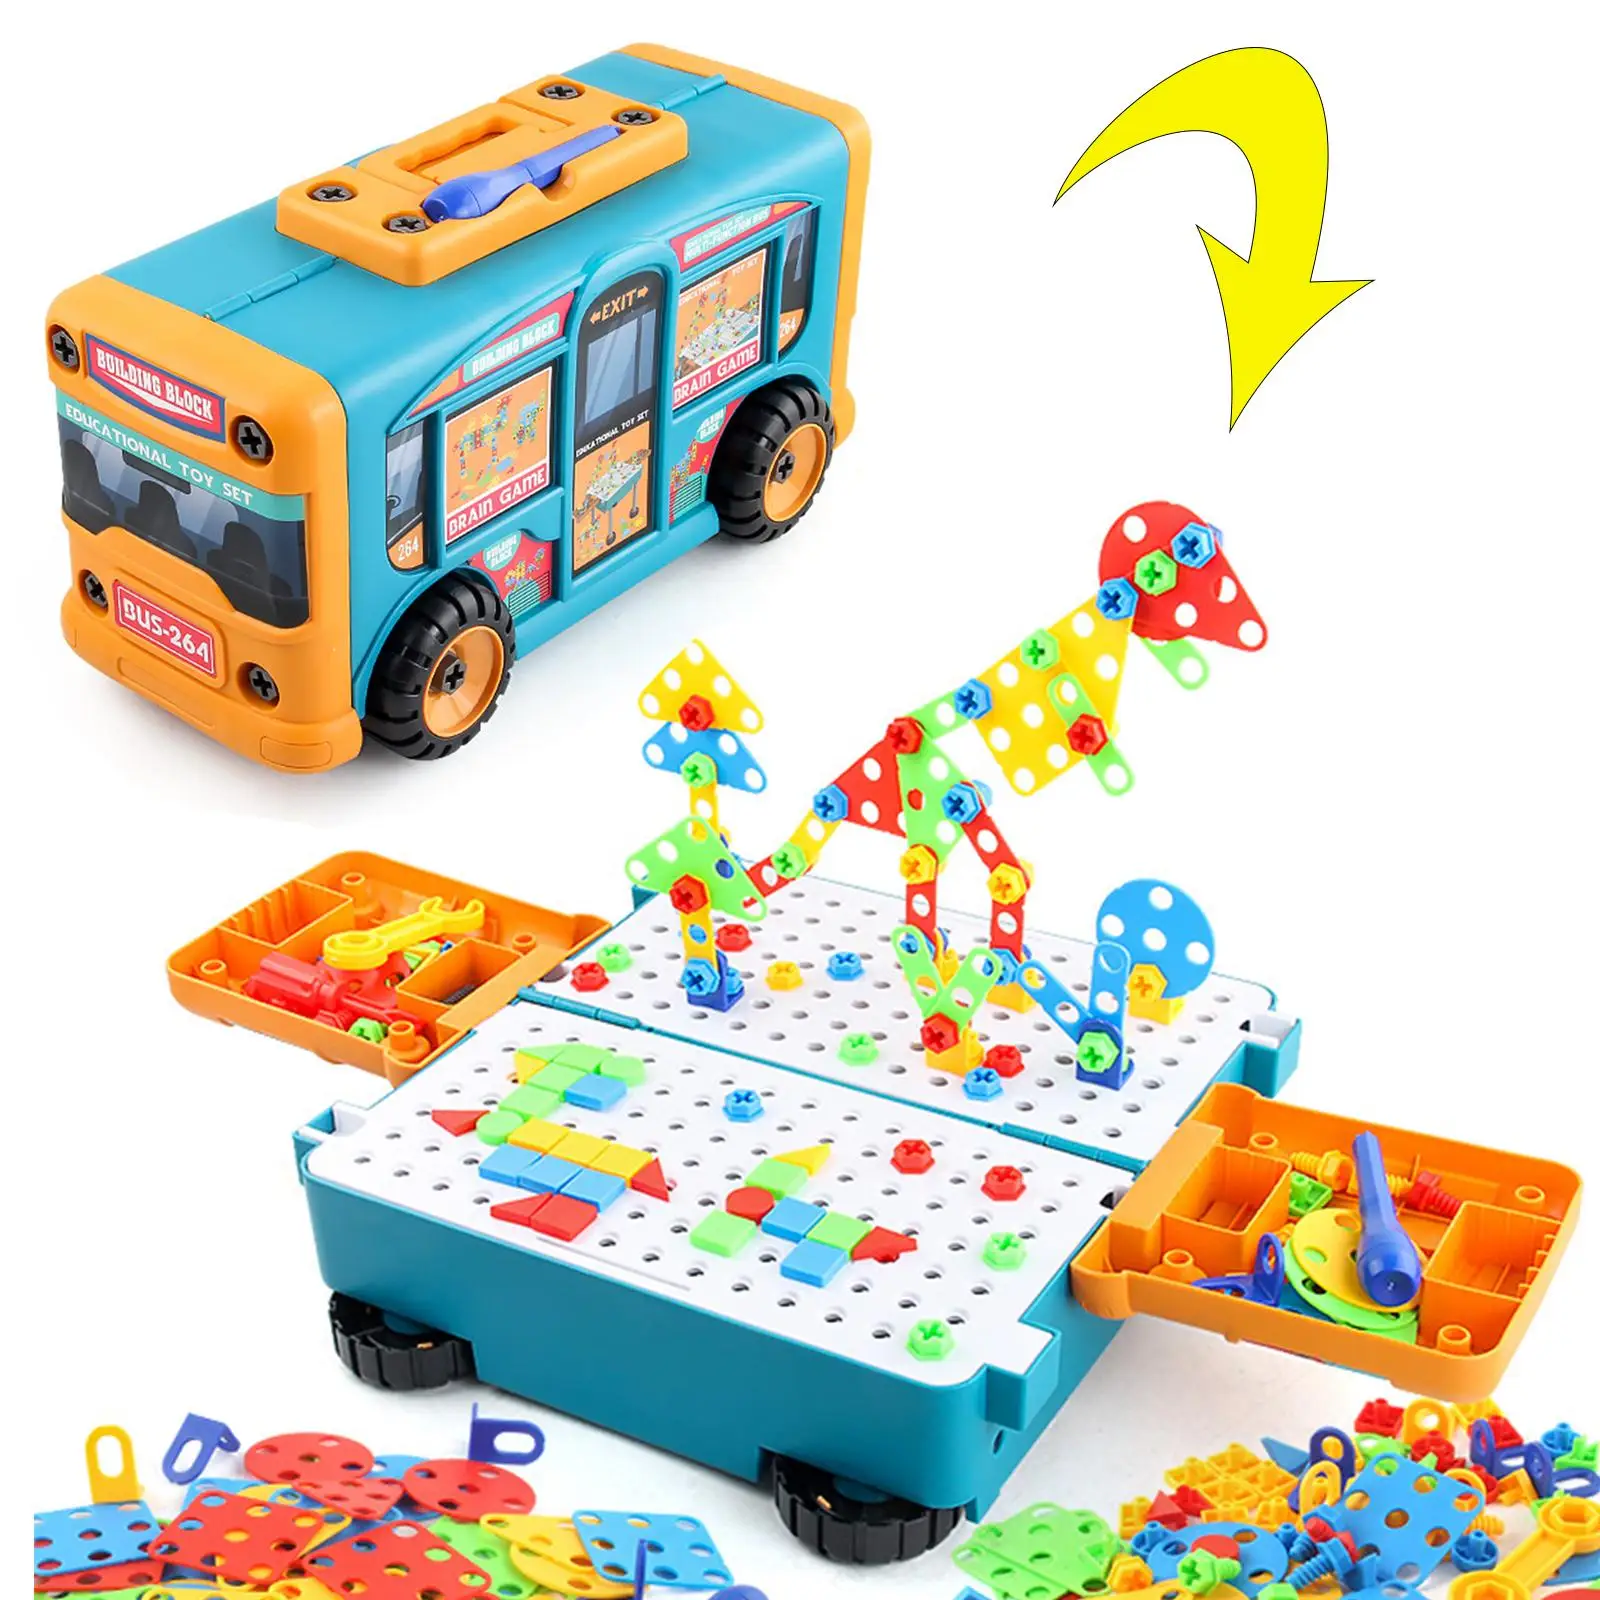   Deformed Bus Toy Assembled Pieces Variable Shape for Children  